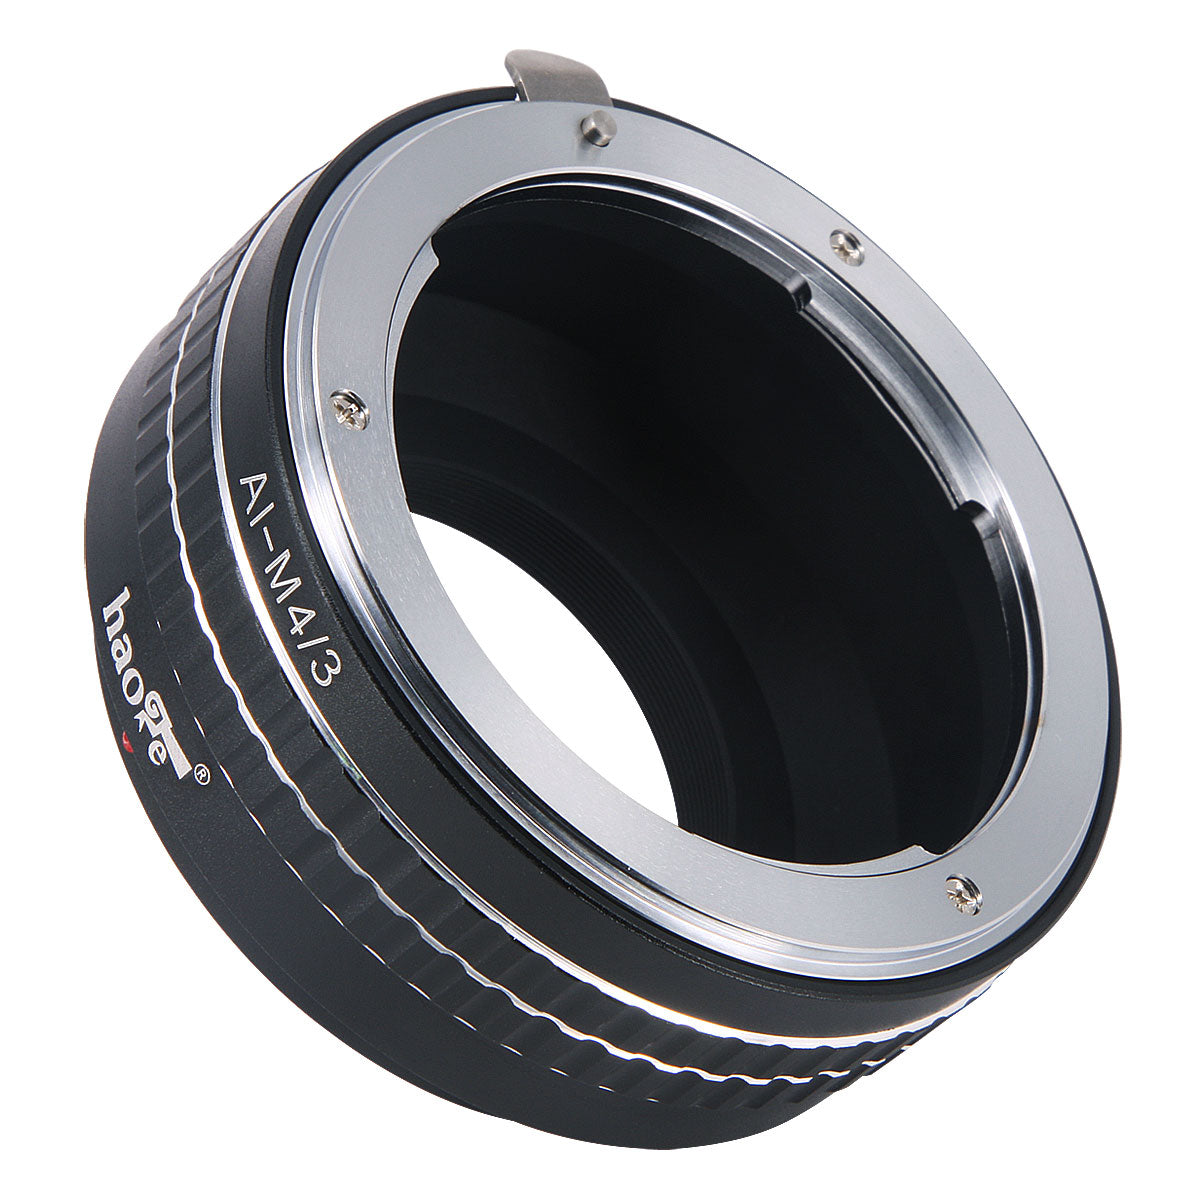 Haoge Manual Lens Mount Adapter for Nikon Nikkor F/AI/AIS/D Mount Lens to Olympus and Panasonic Micro Four Thirds MFT M4/3 M43 Mount Camera